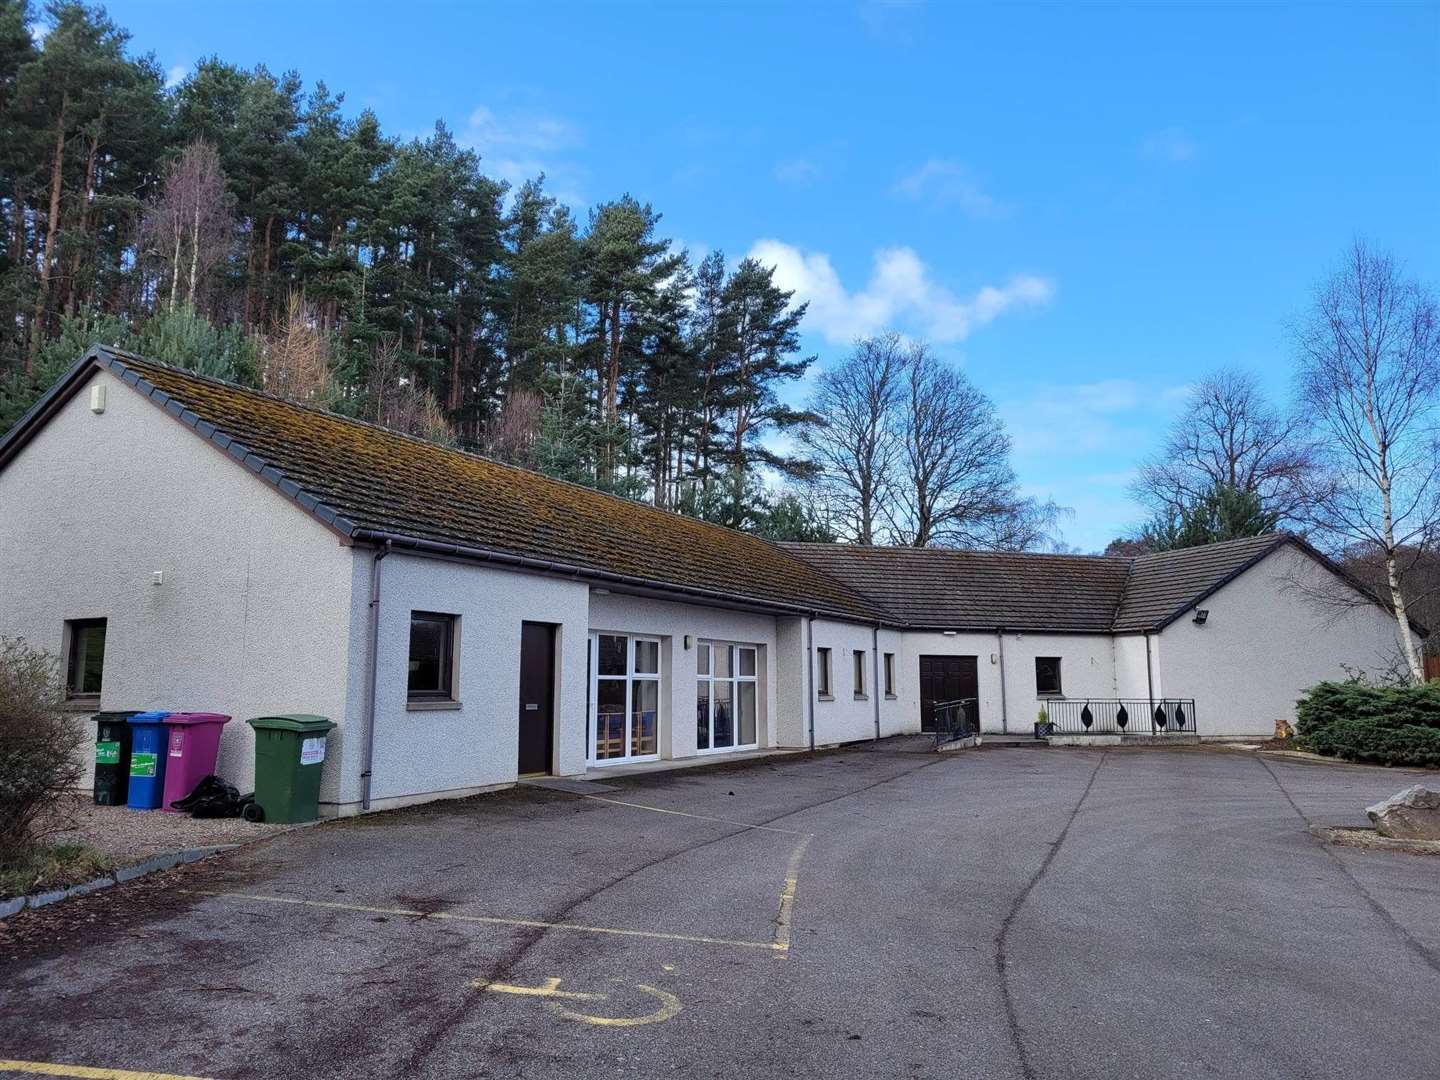 The building is situated in Clovenside Cemetery car park.